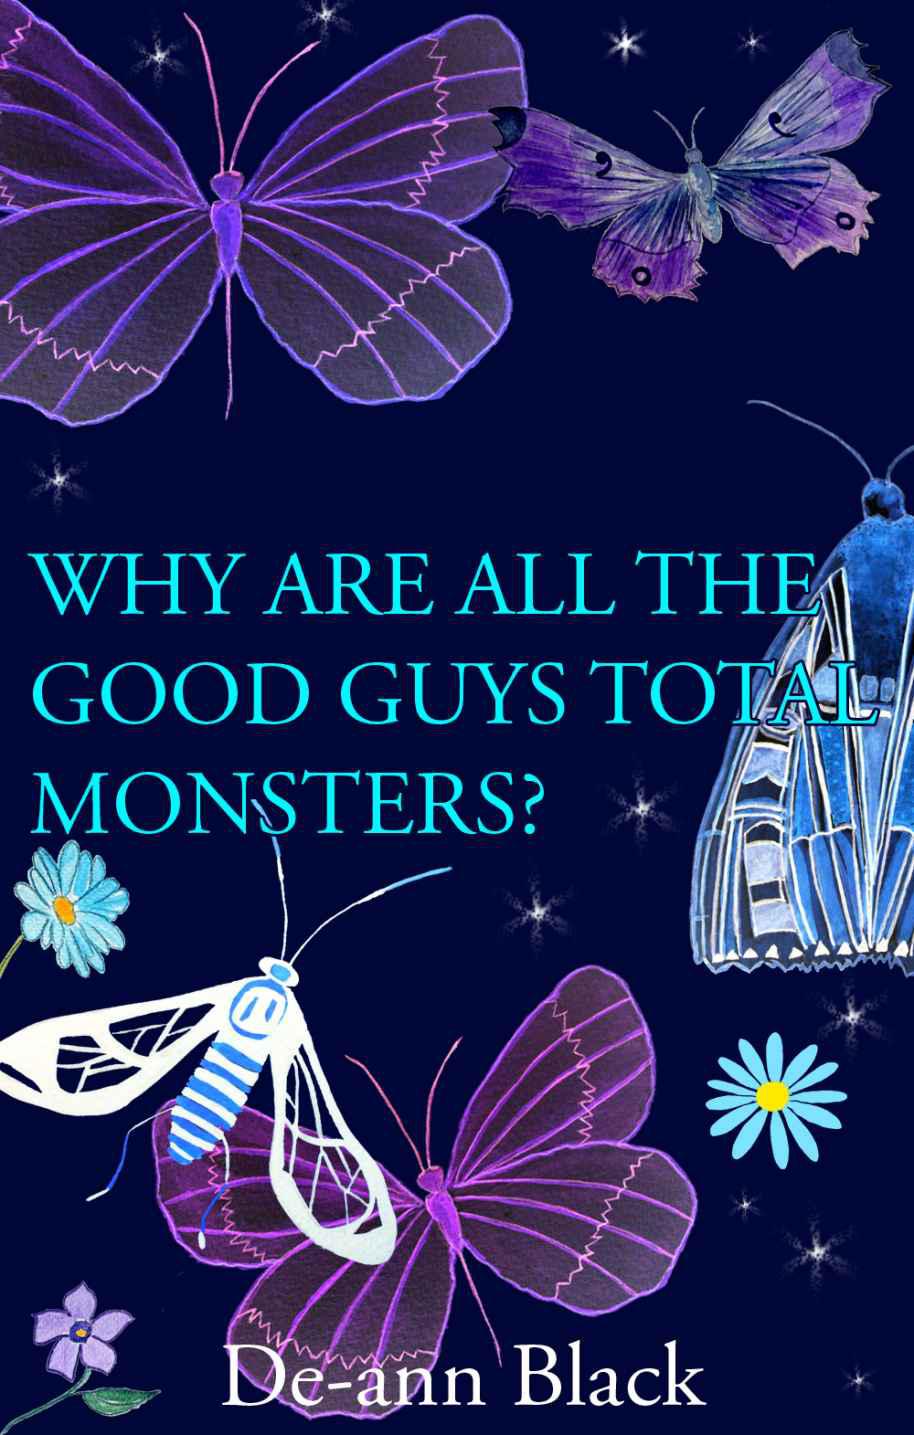 Why Are All the Good Guys Total Monsters?